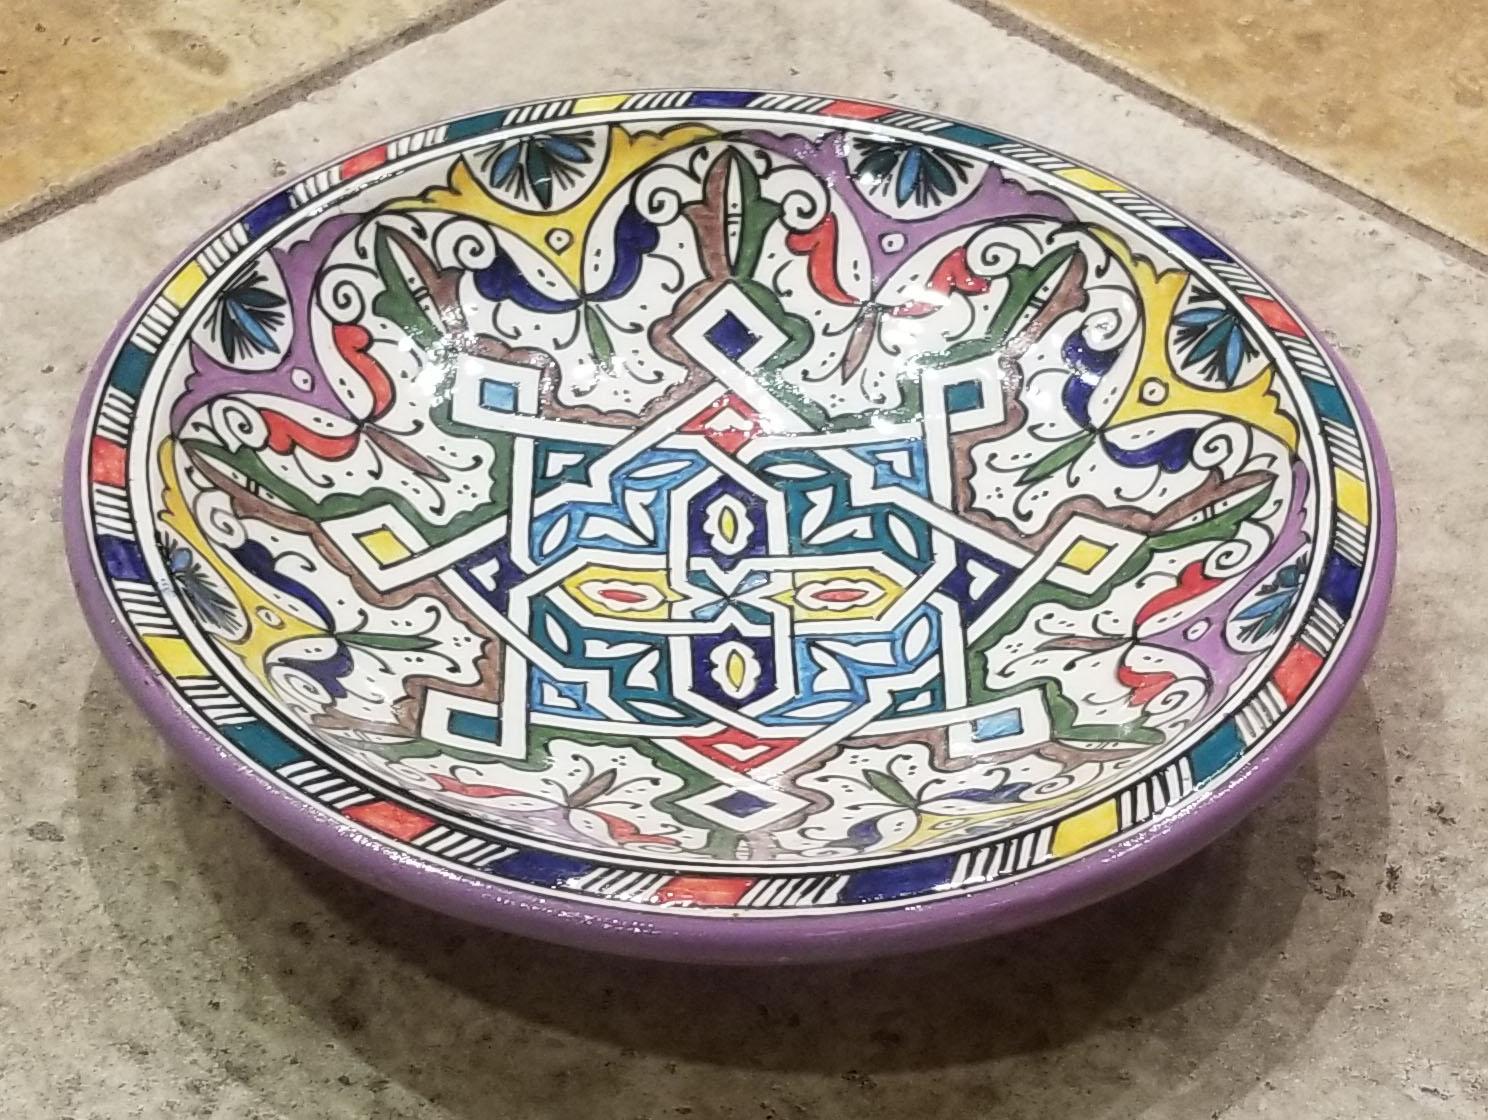 A rare or one of a kind exquisite Moroccan plate / charger not only for decoration purpose, but also to serve amazing food. This plate in hand painted and is multi-color. It would be a terrific add-on to any decor. Great Handcraftsmanship and